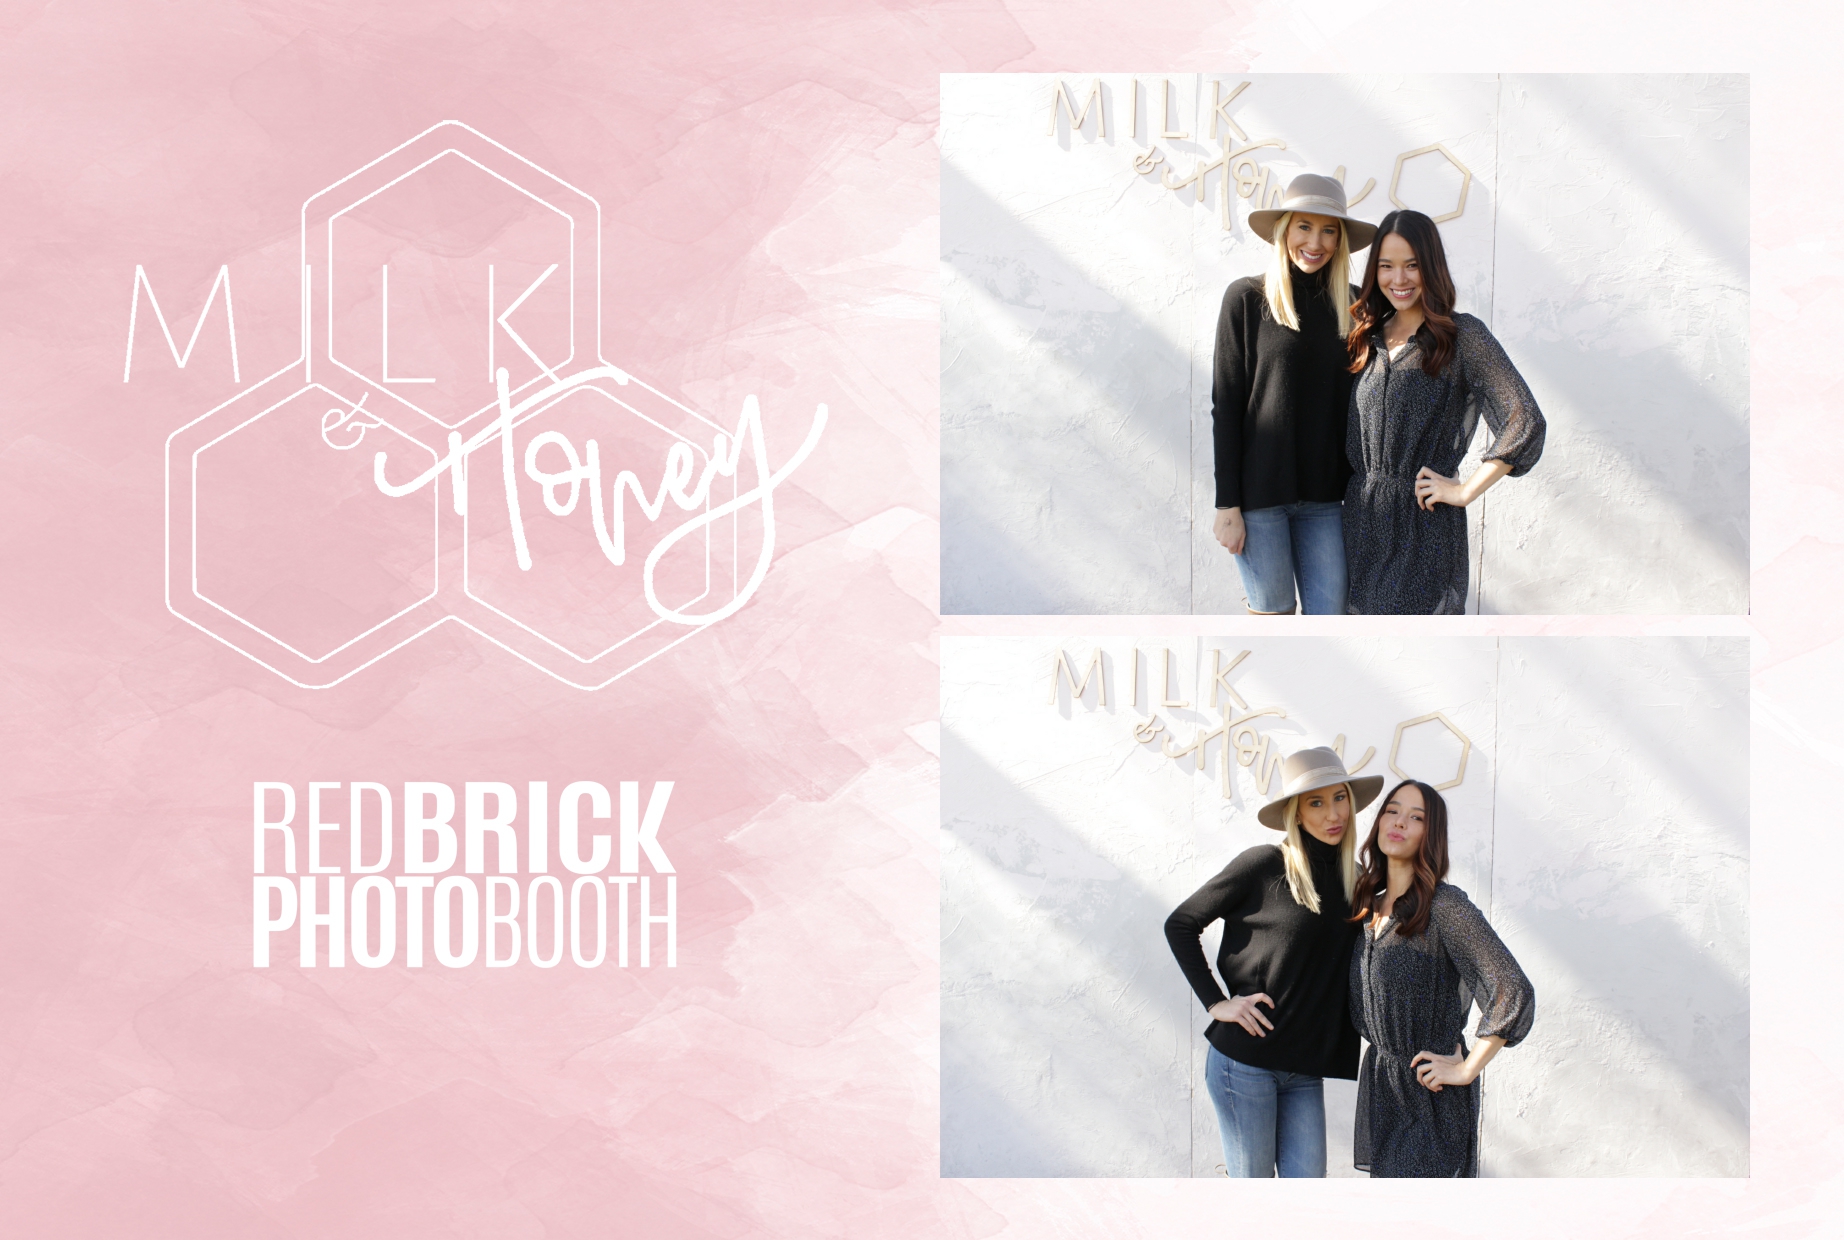 friends at the milk and honey event take photo with red brick photo booth